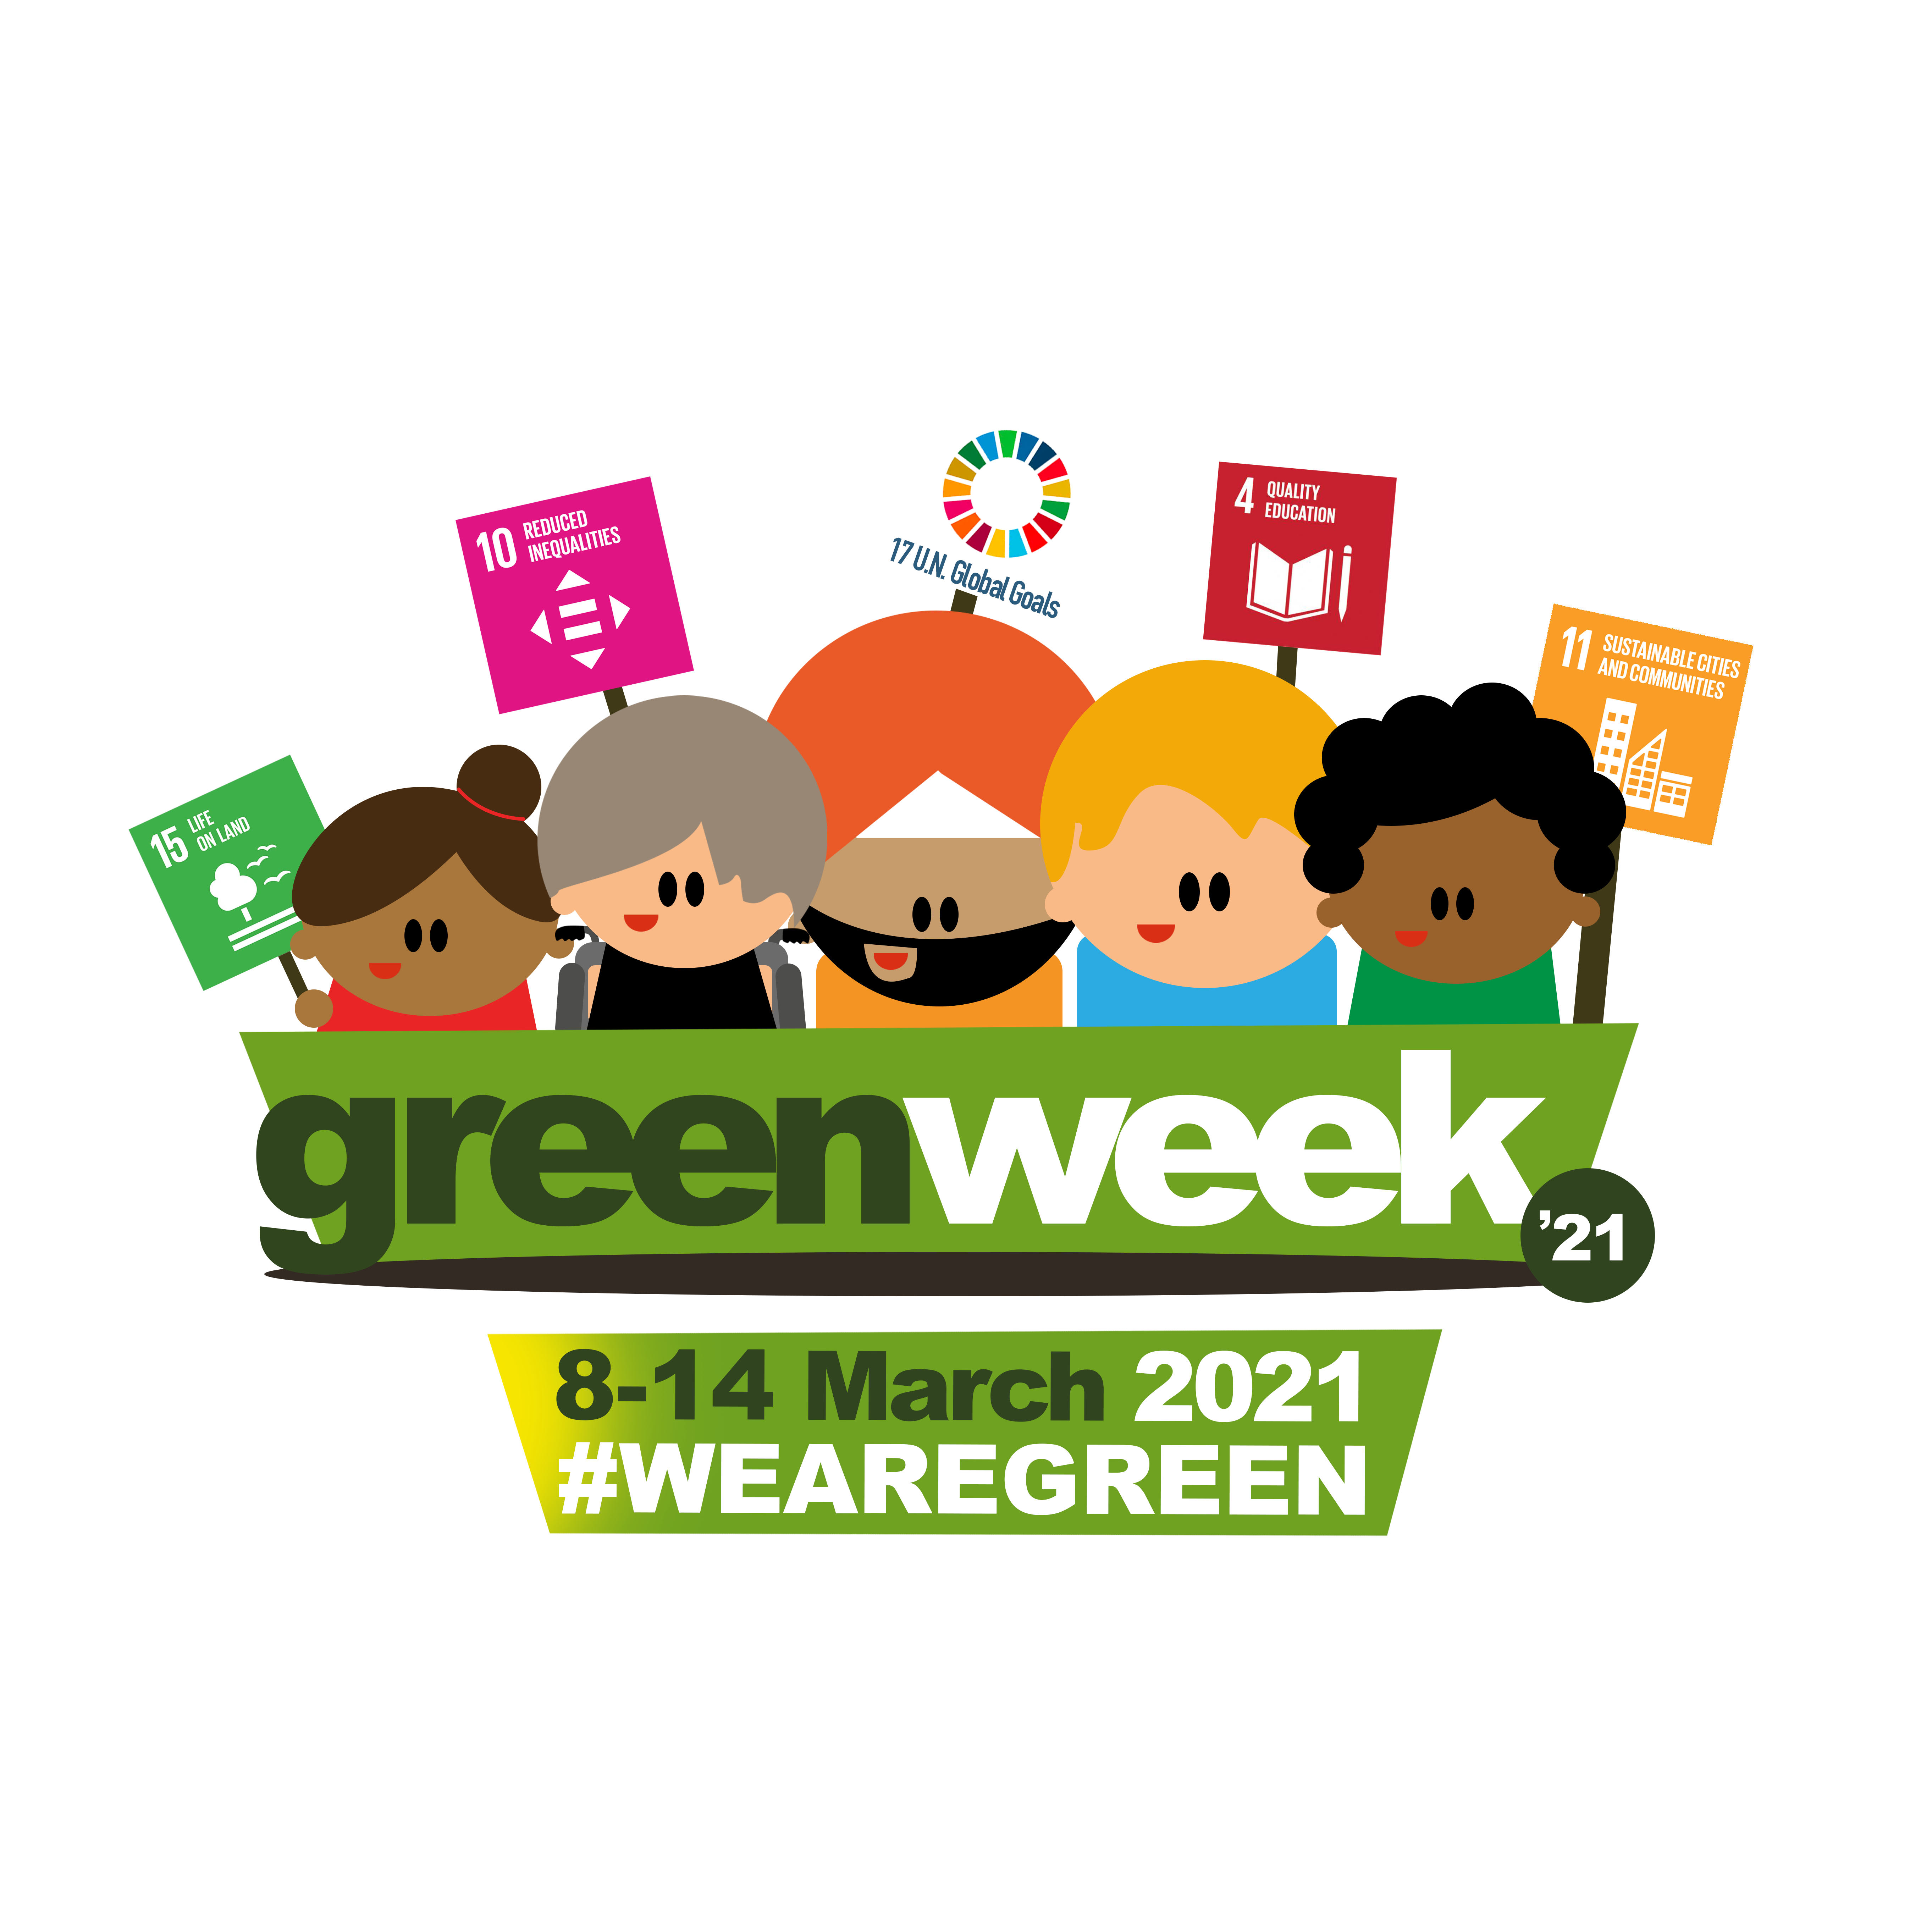 Virtual Green Week aims to collaborate with local community Mirage News